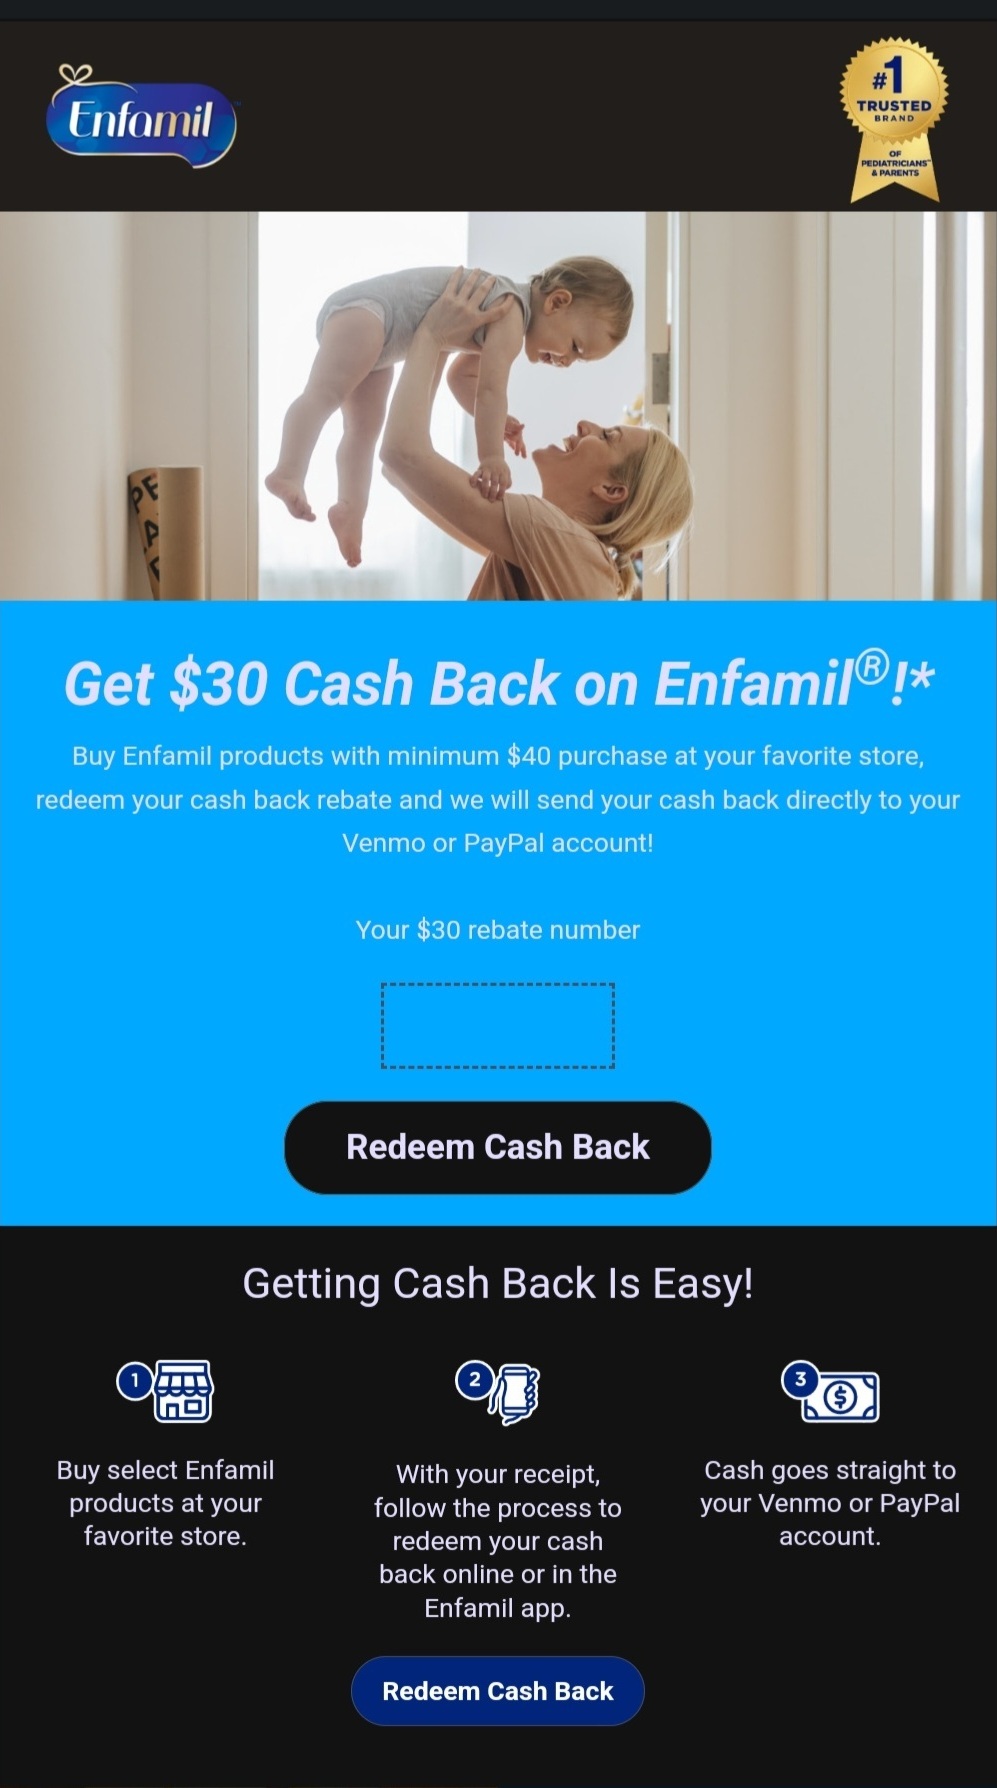 free-30-cash-back-via-venmo-paypal-with-purchase-of-40-of-select